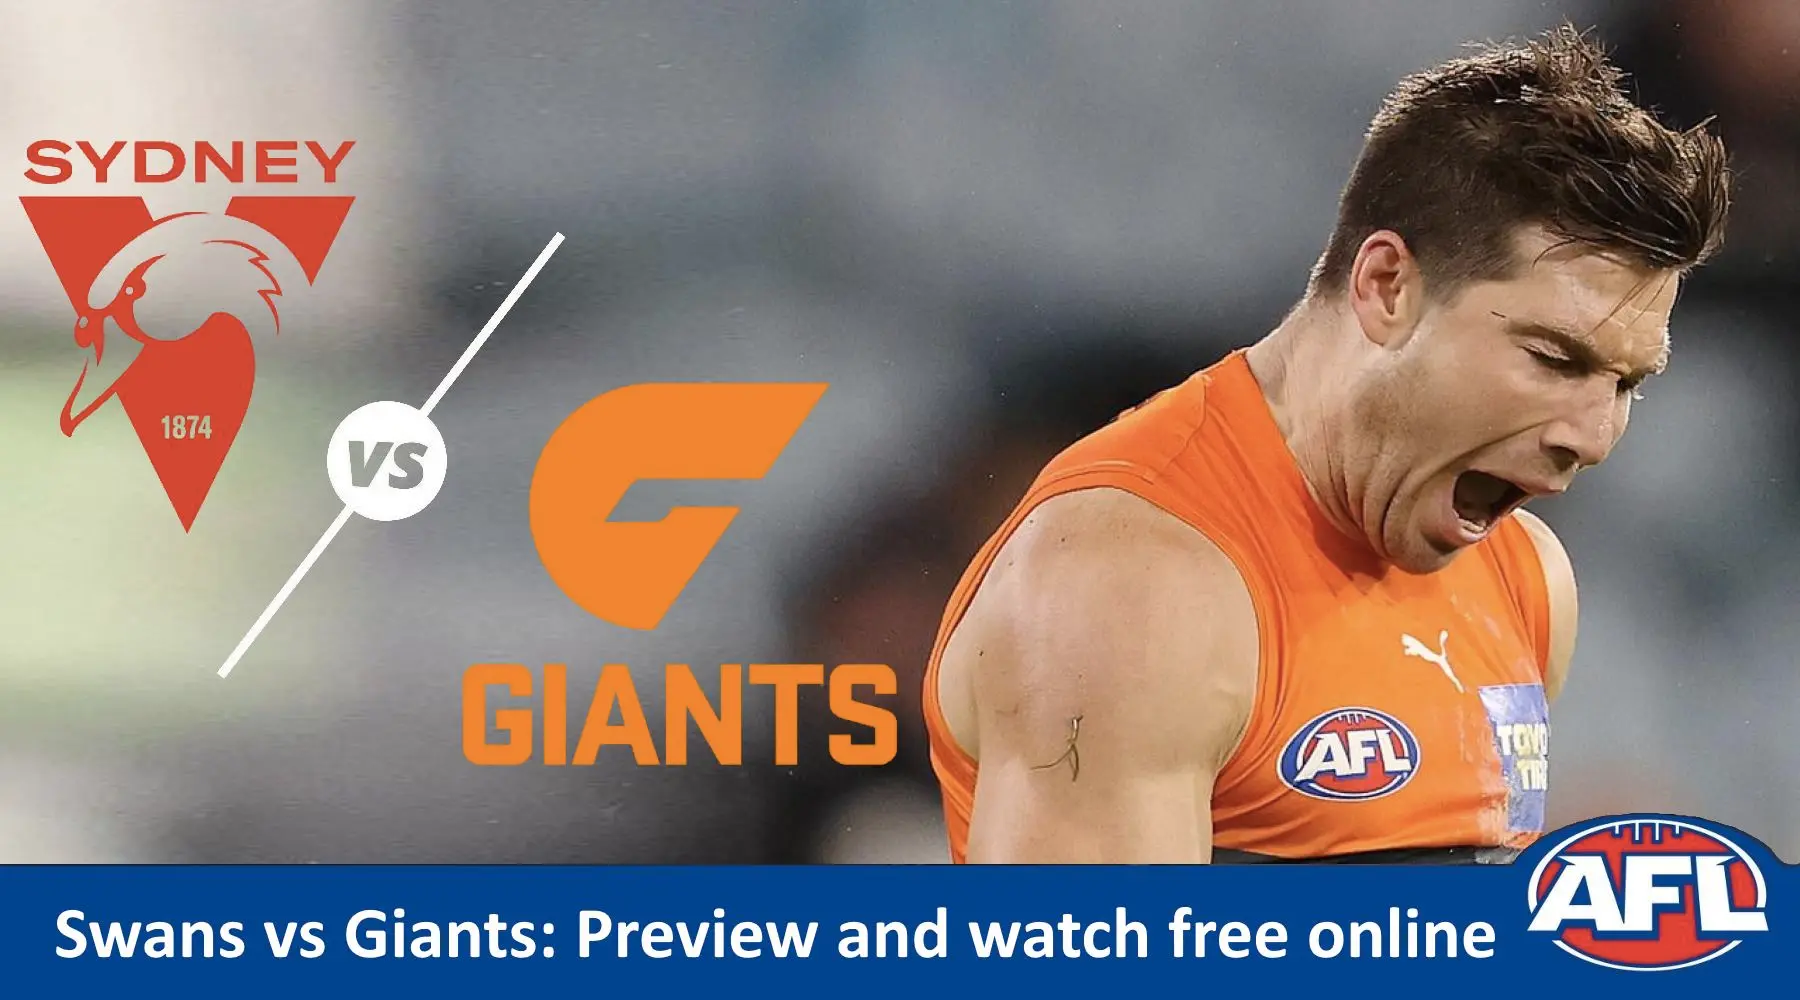 How to watch Sydney vs GWS live and match preview